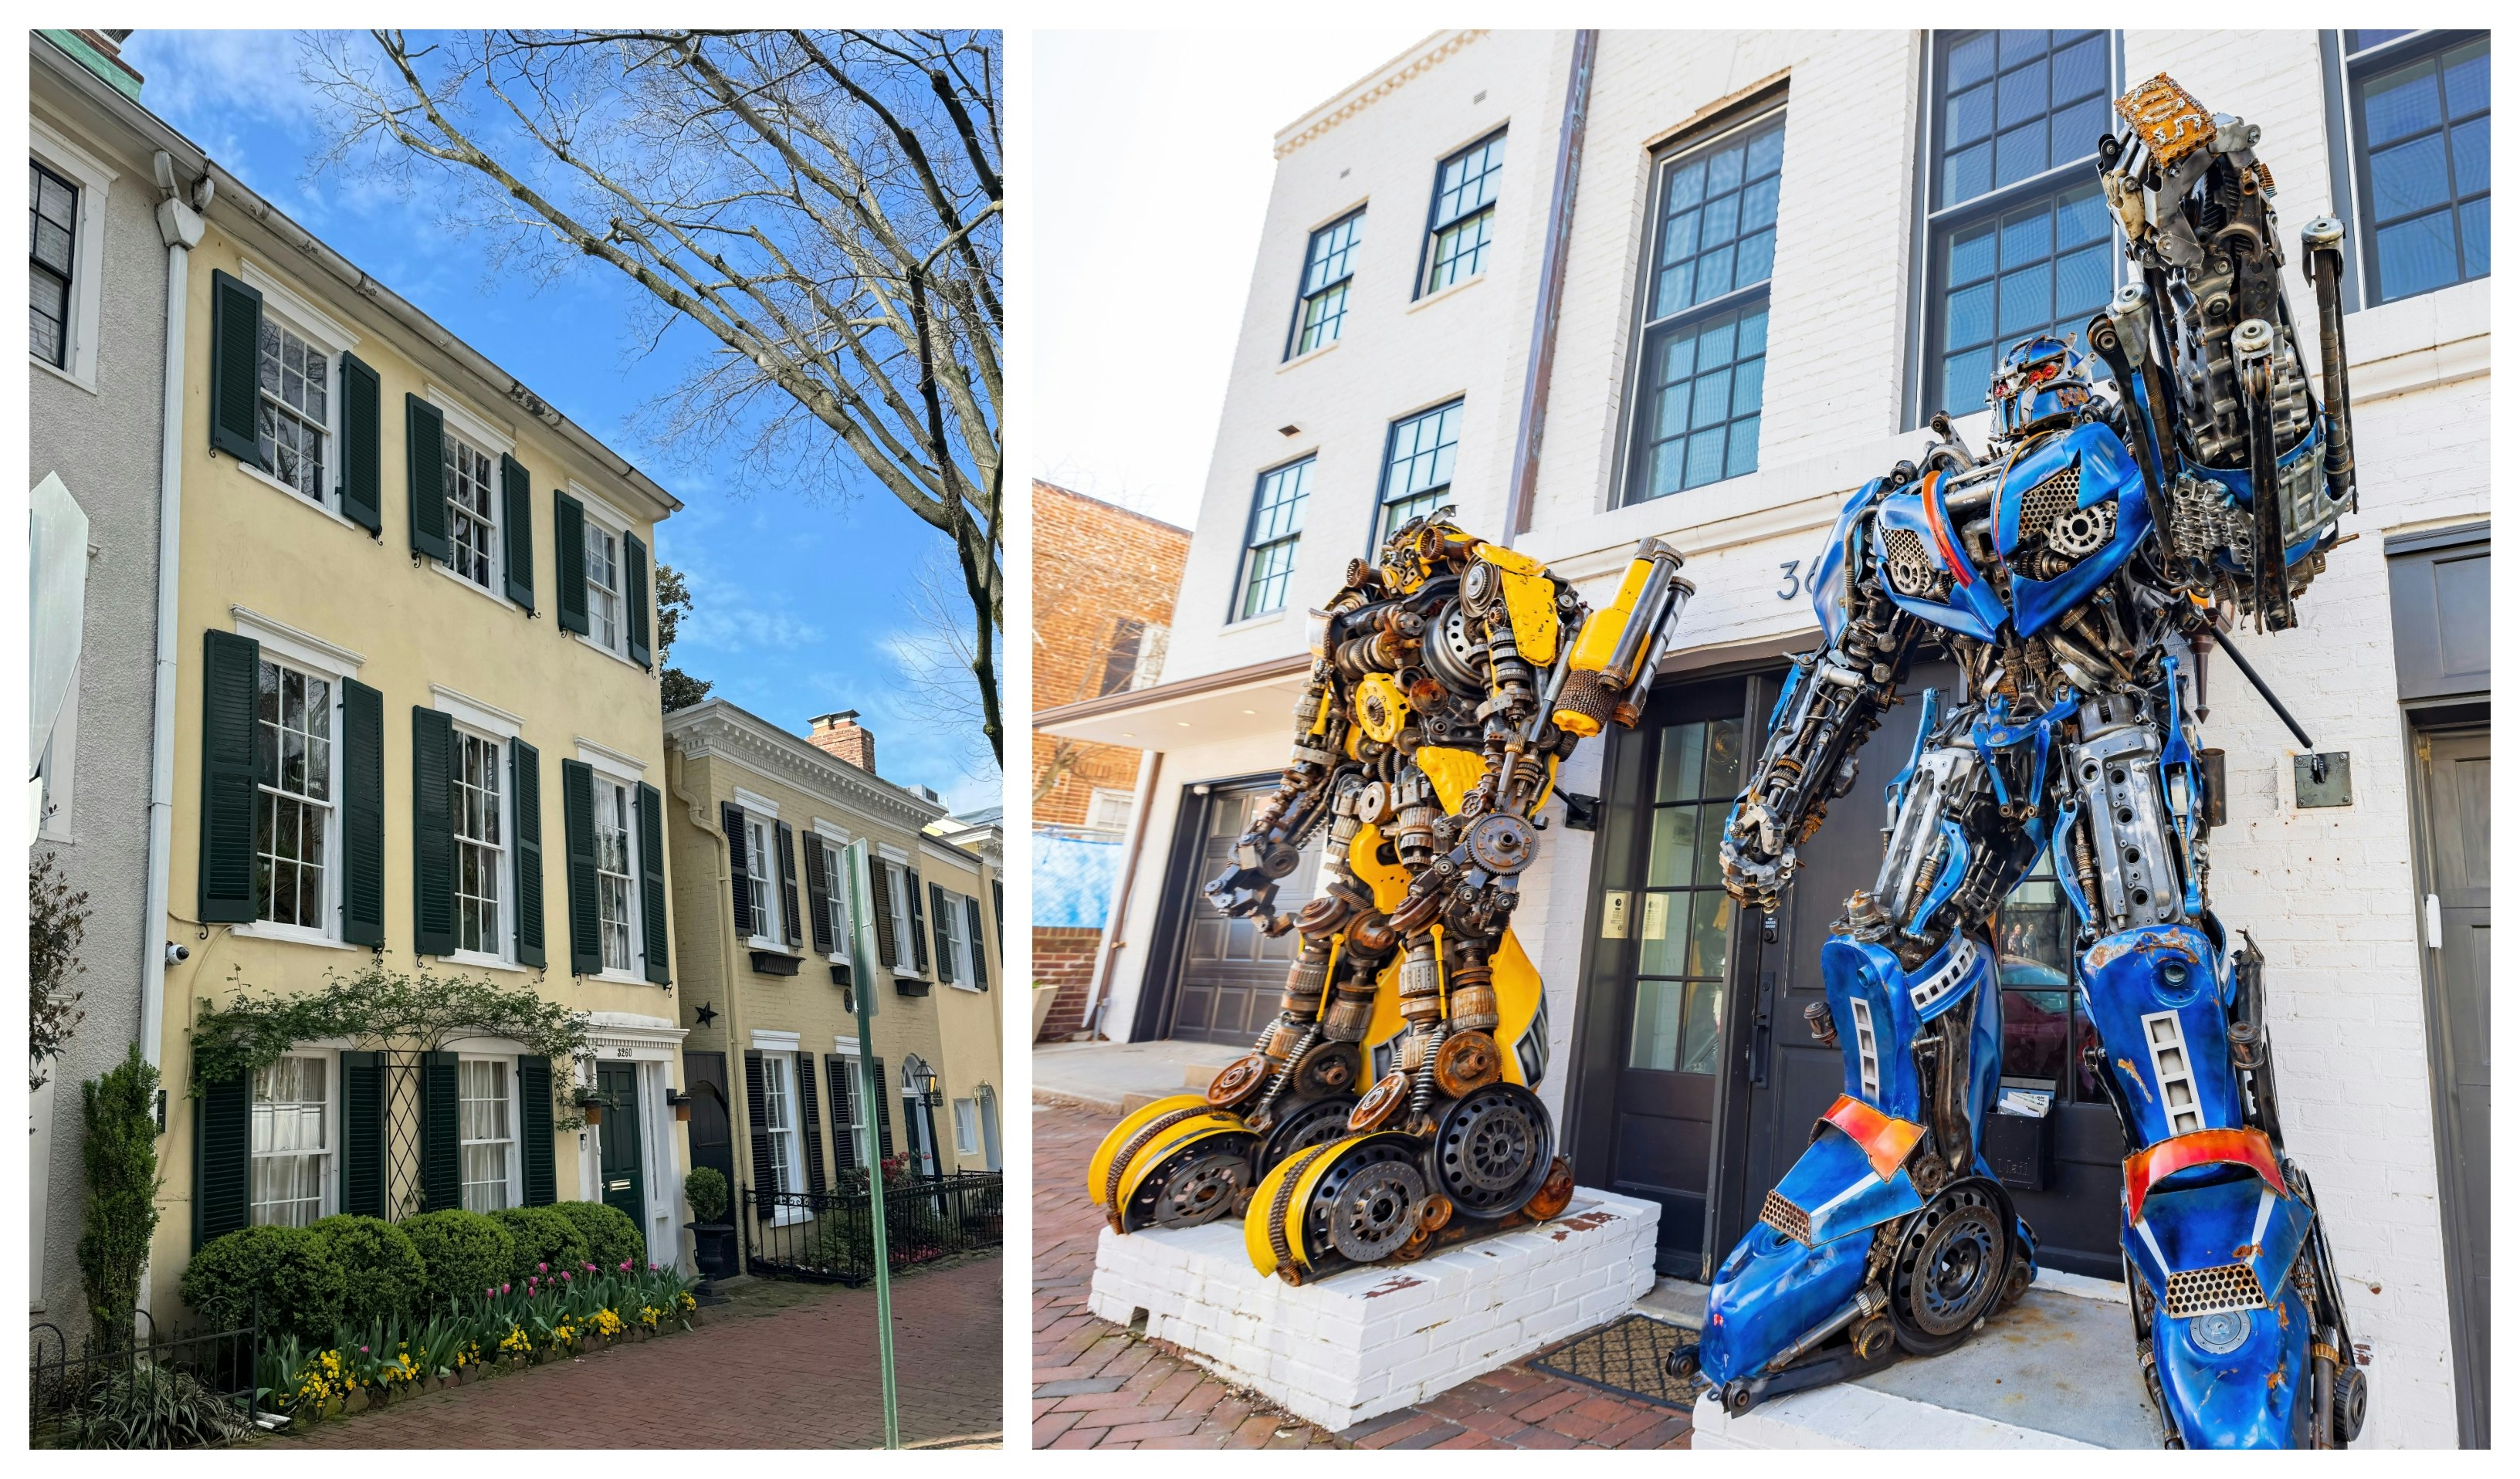 Left: A beautiful yellow townhome in Georgetown, DC; Right: the controversial "Transformers House" 